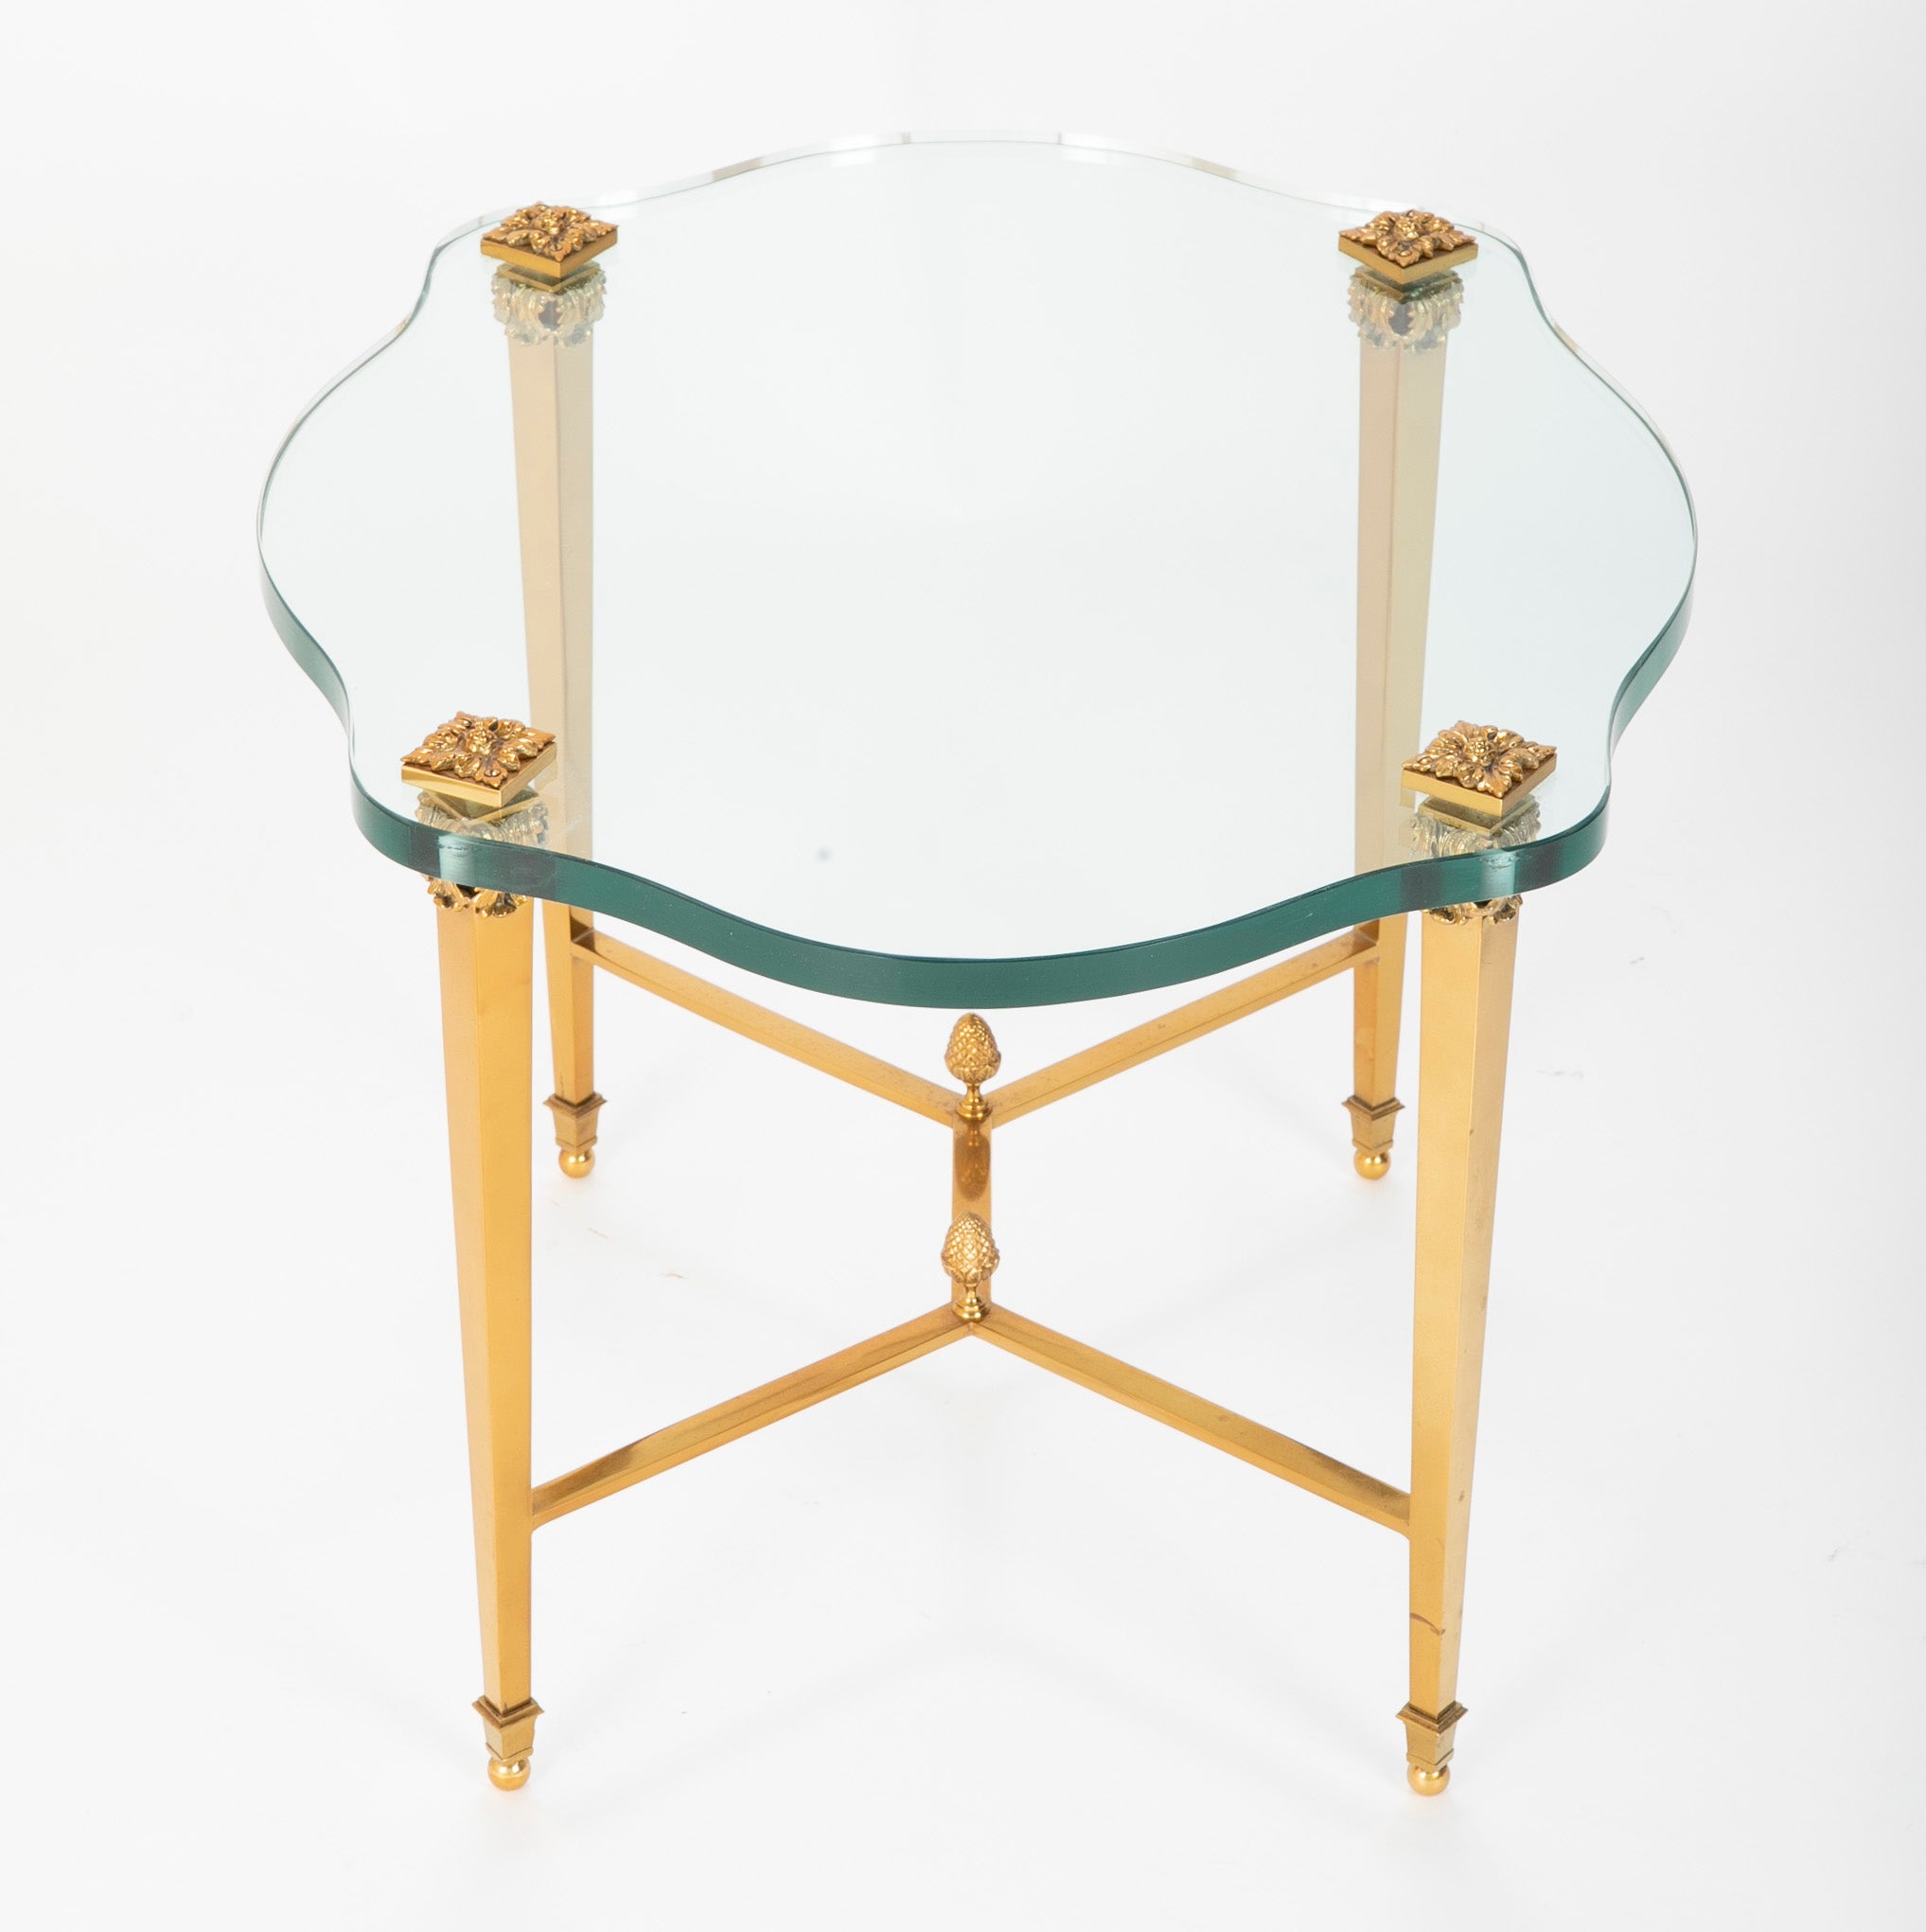 French Neo-Classical Style Gilt Bronze & Glass Table in the Manner of Guerin